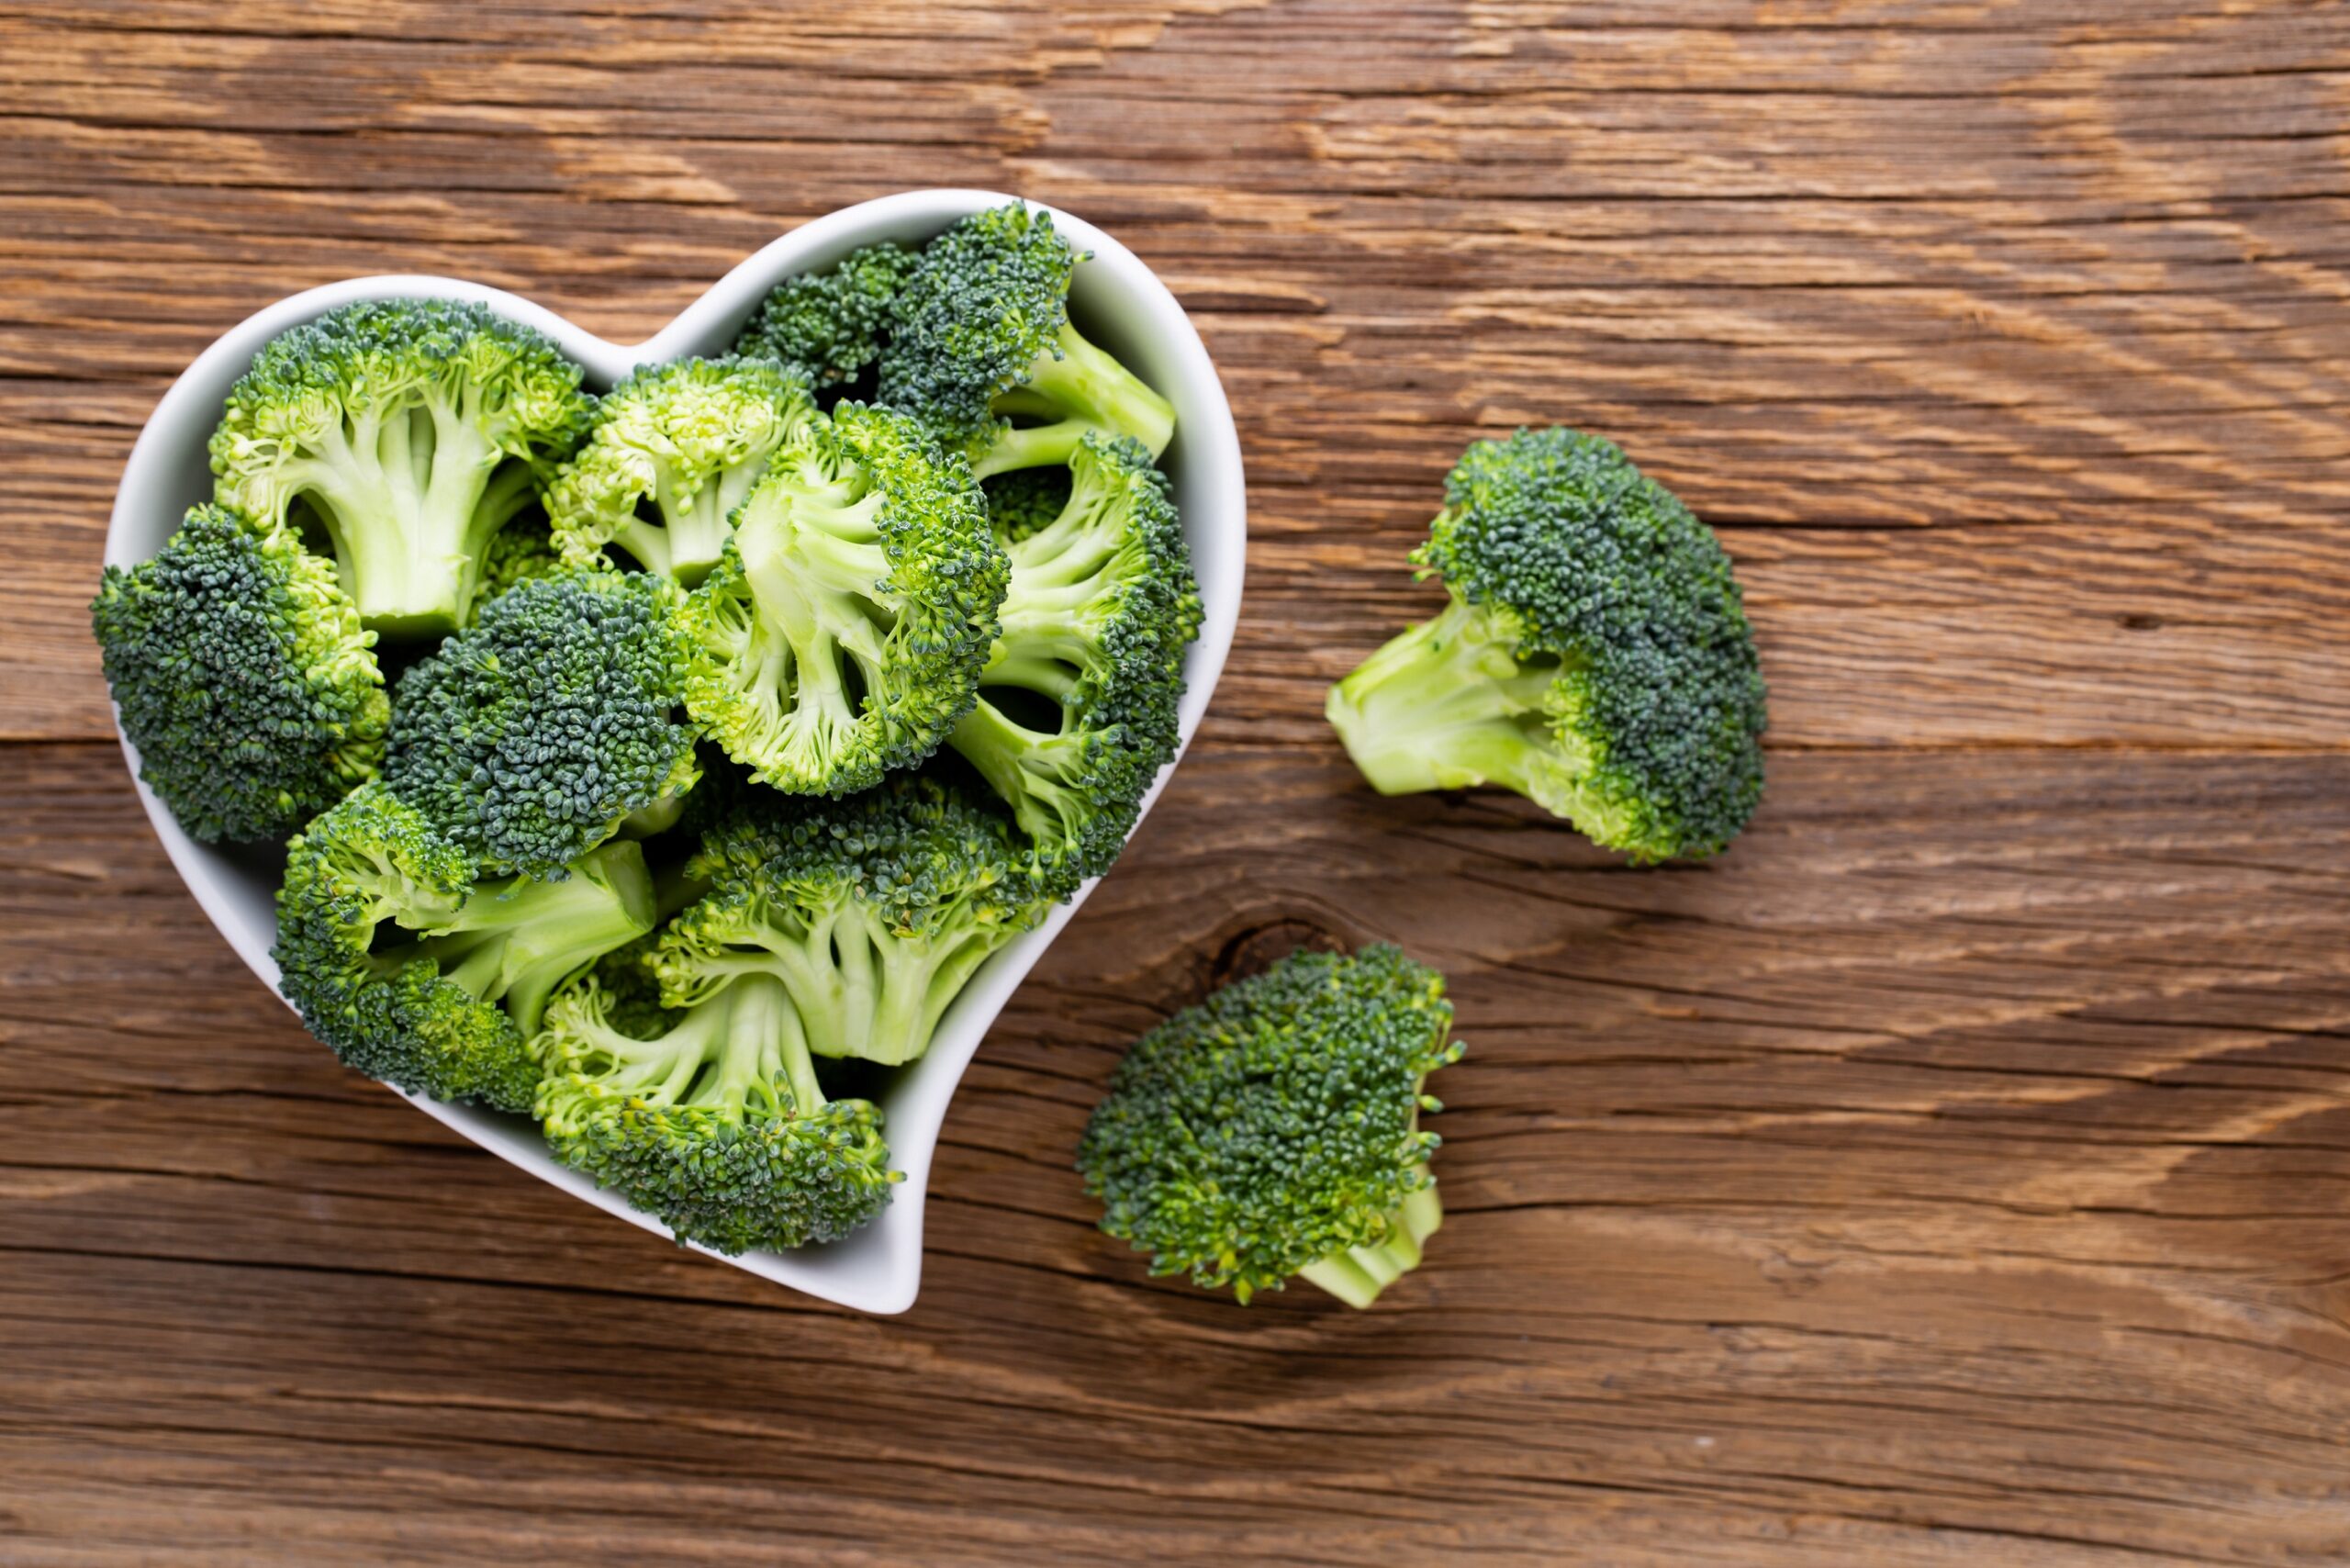 Nutrition: Broccoli is not equally healthy for everyone – gut bacteria are crucial